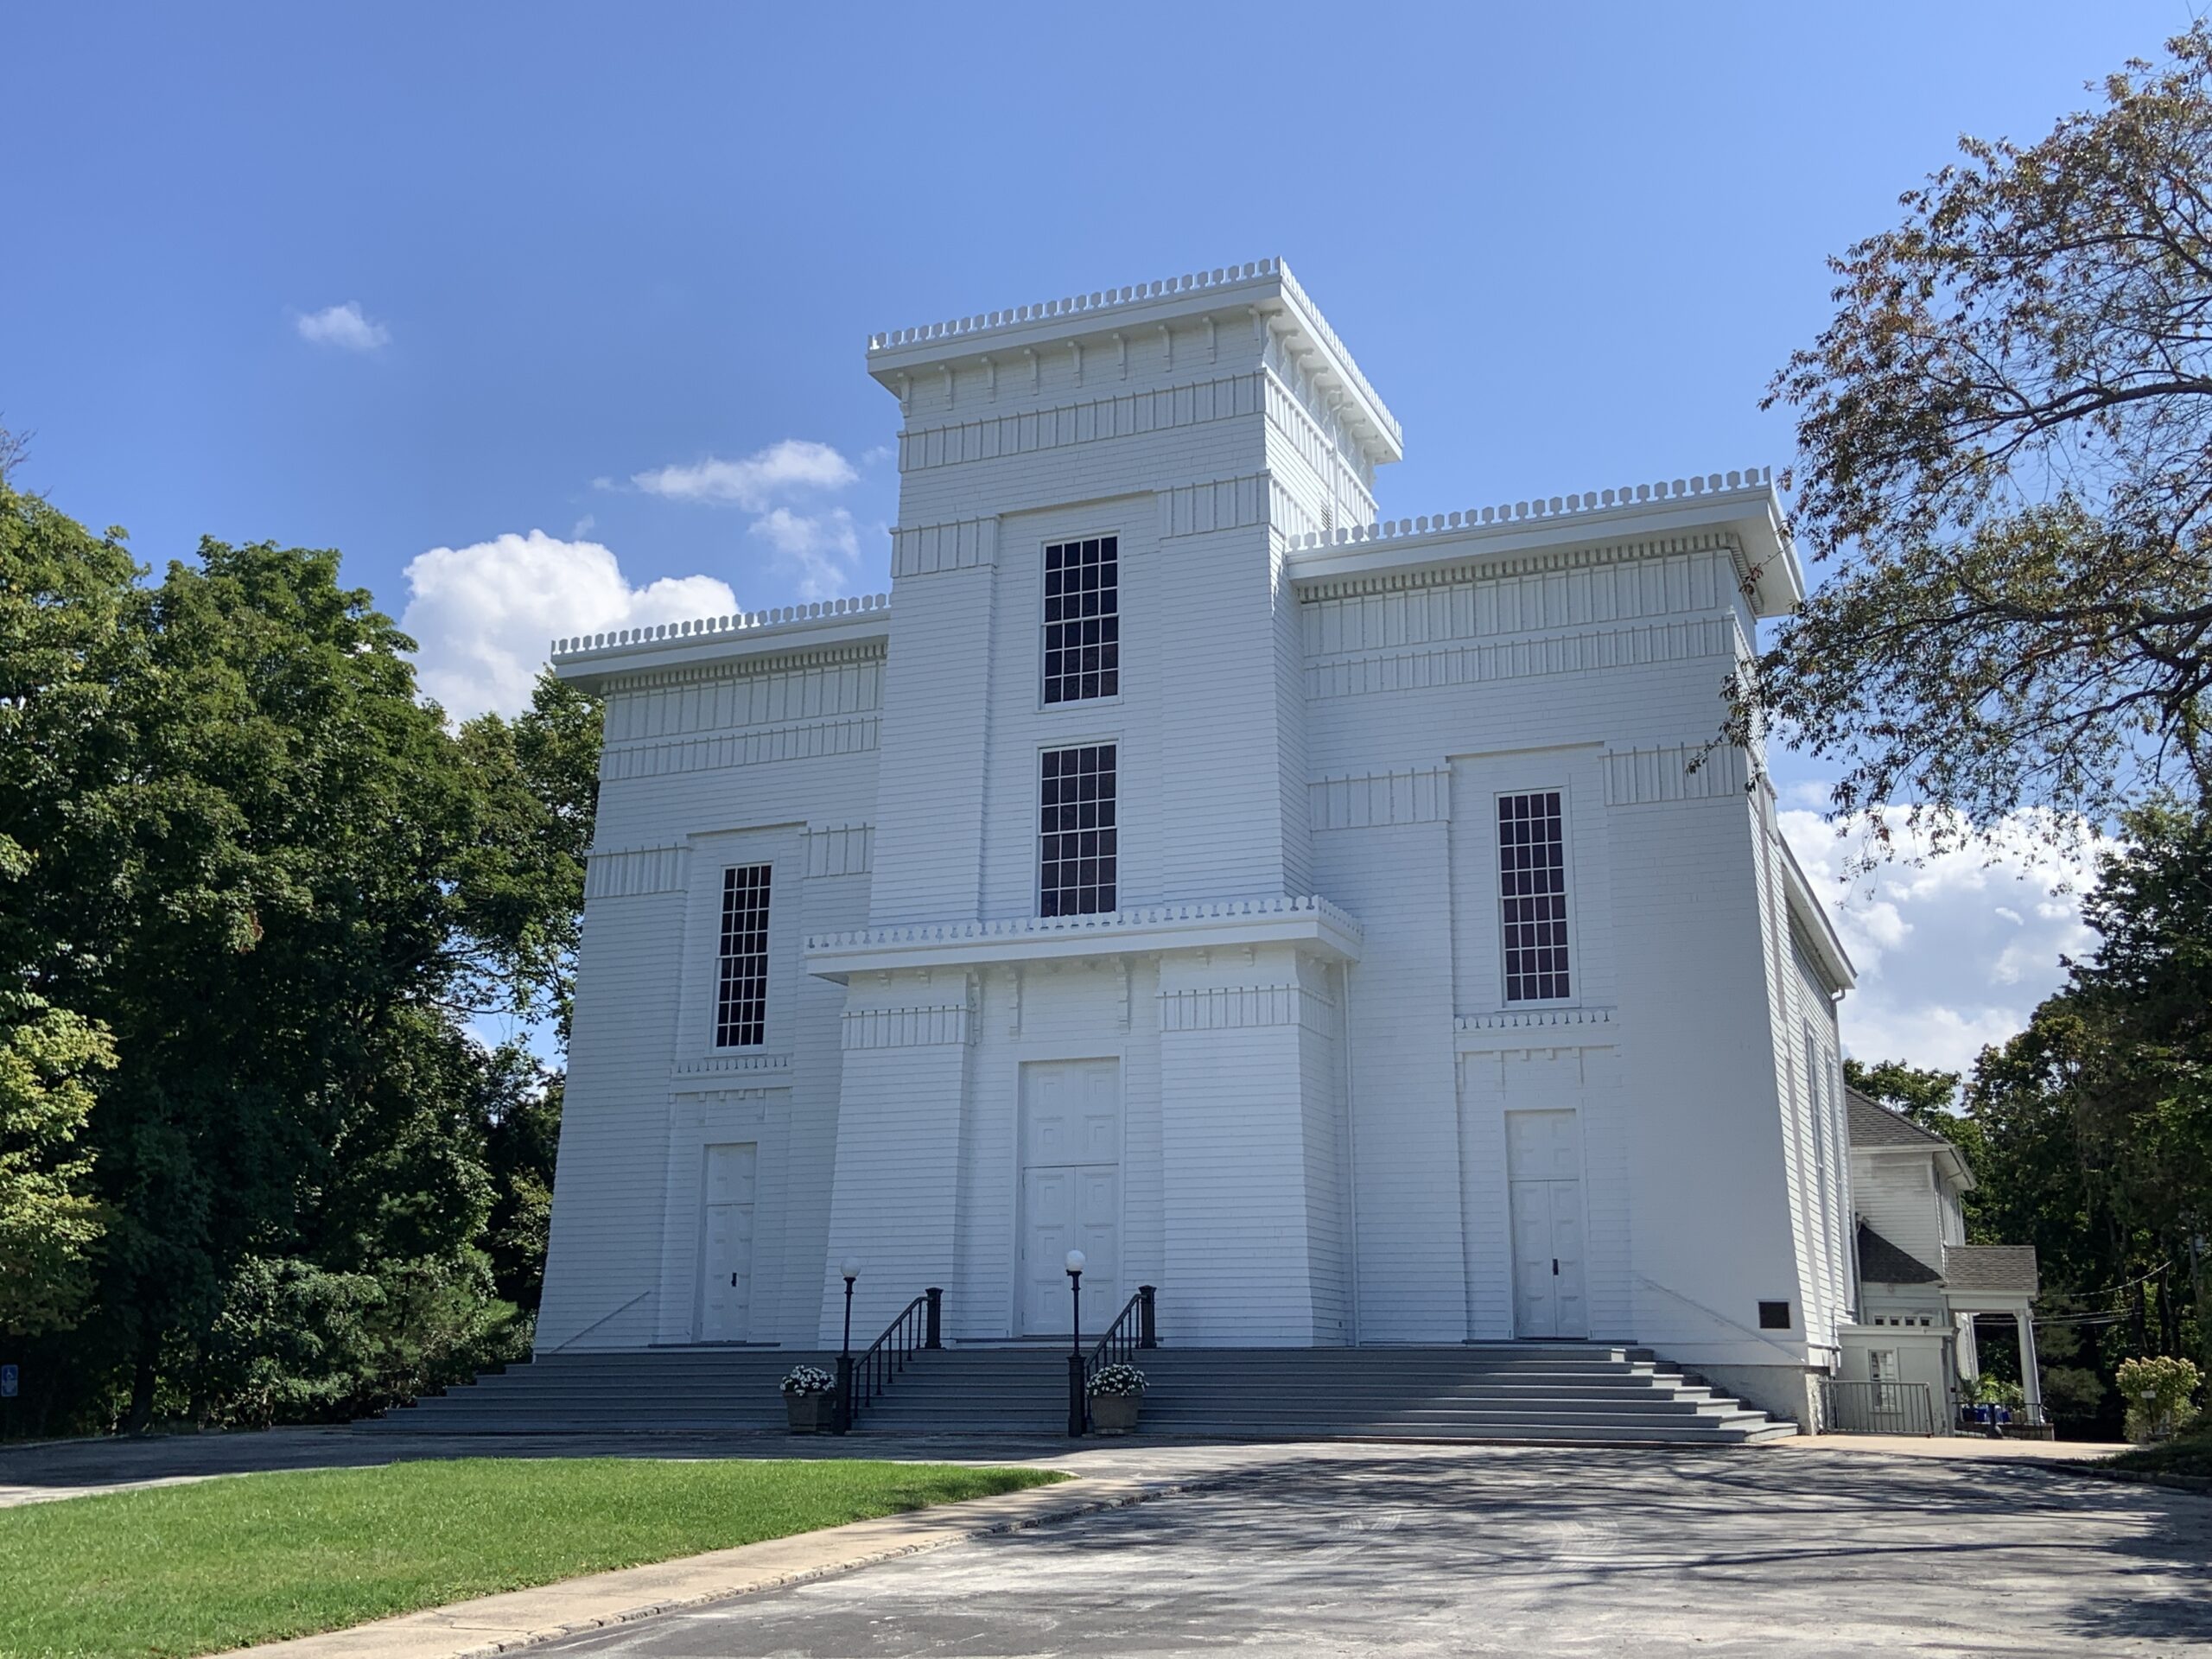 The First Presbyterian (Old Whalers') Church of Sag Harbor as it looks today. STEPHEN J. KOTZ